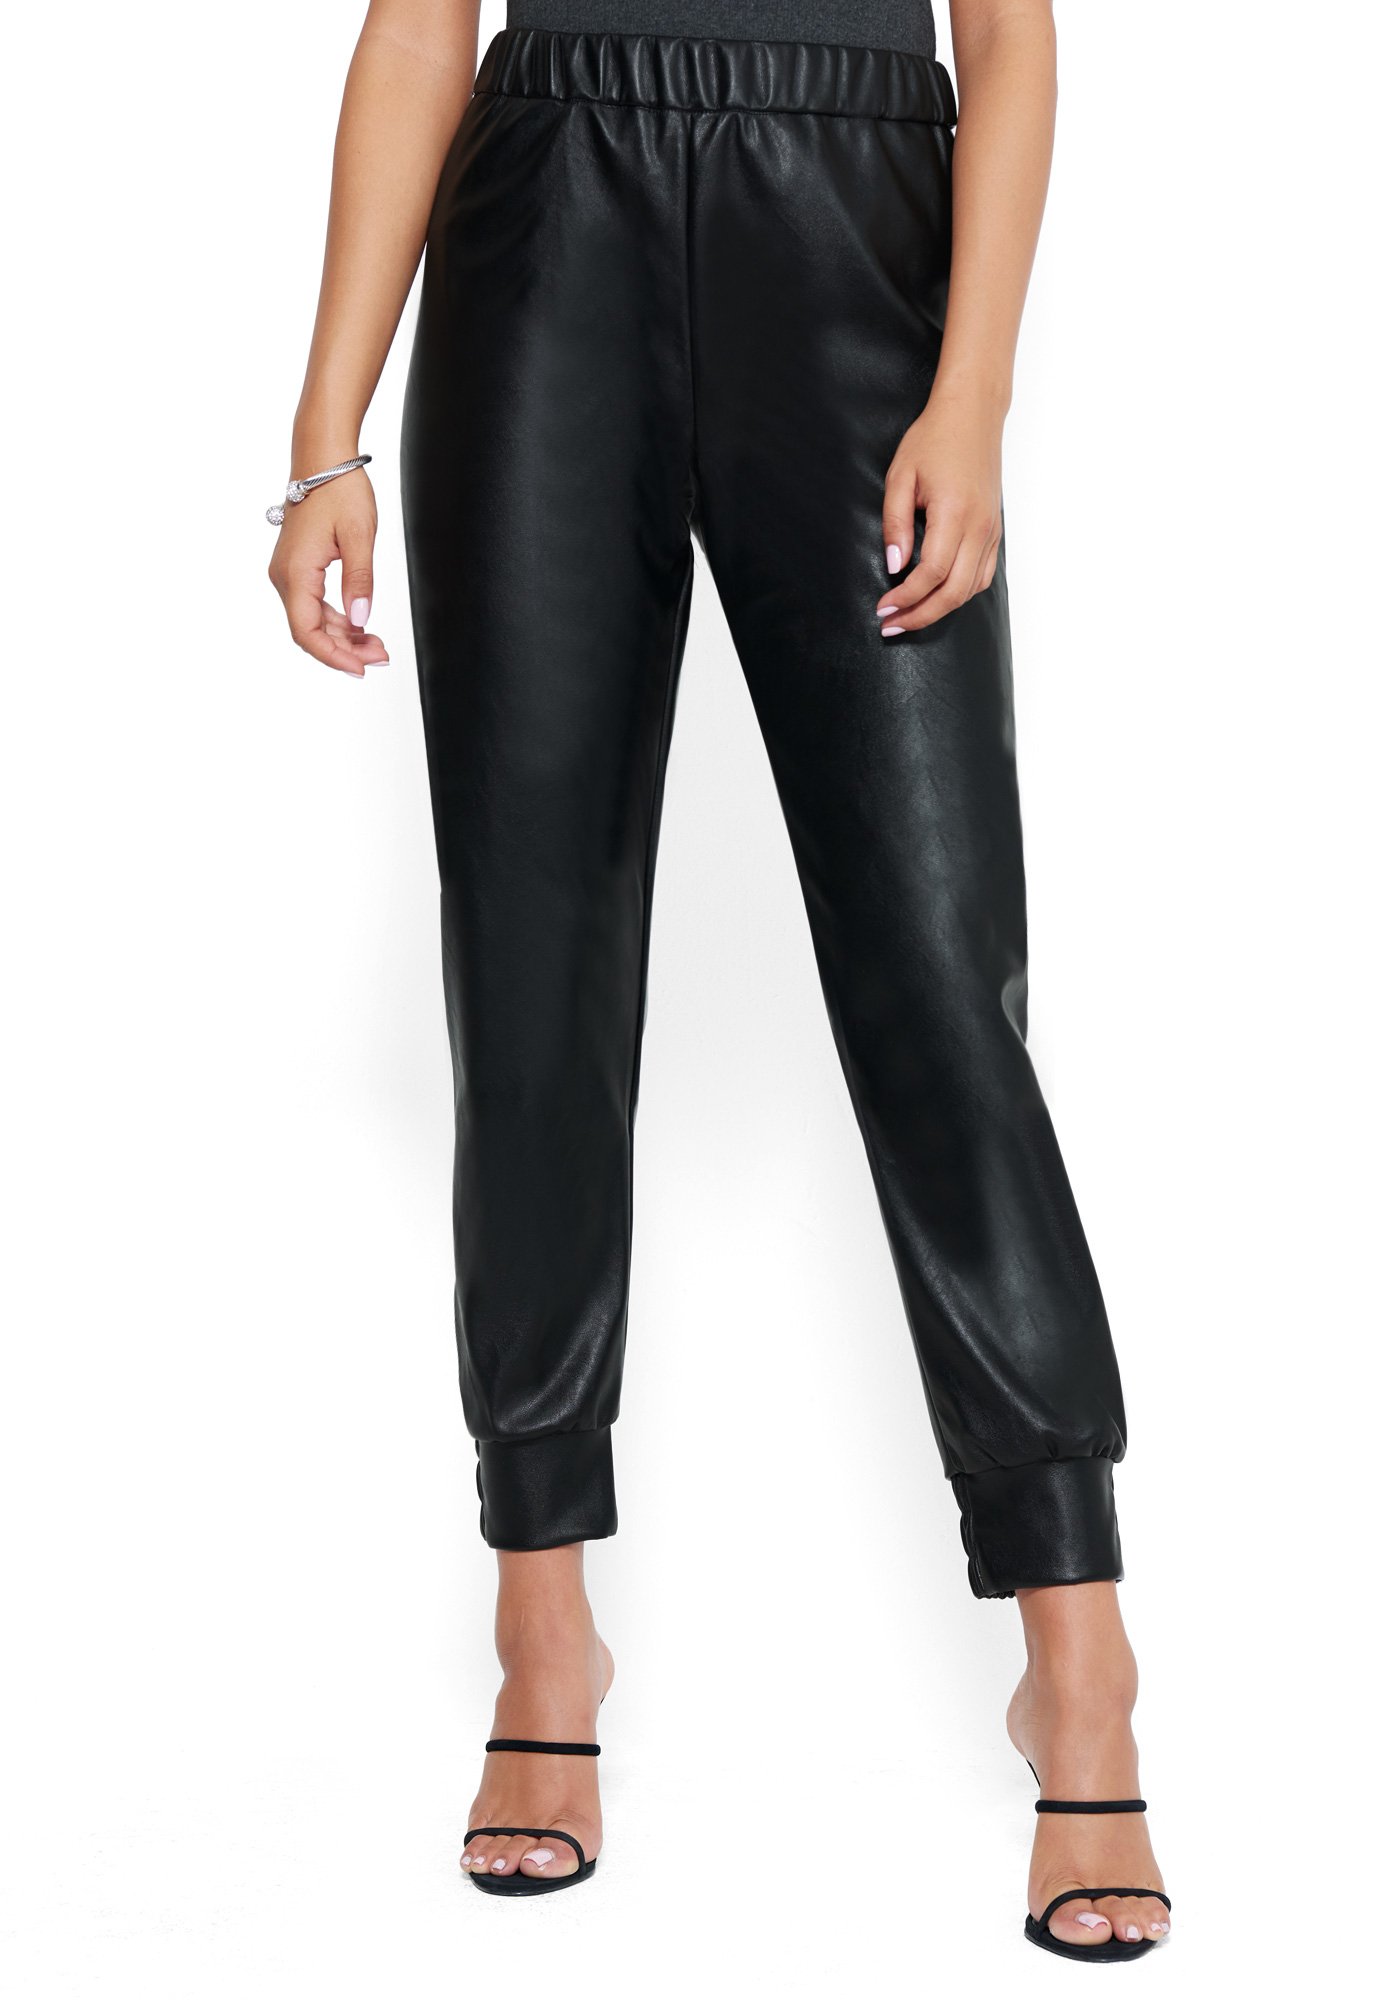 Bebe Women's Faux Leather Jogger Pant, Size Small in Black Polyurethane